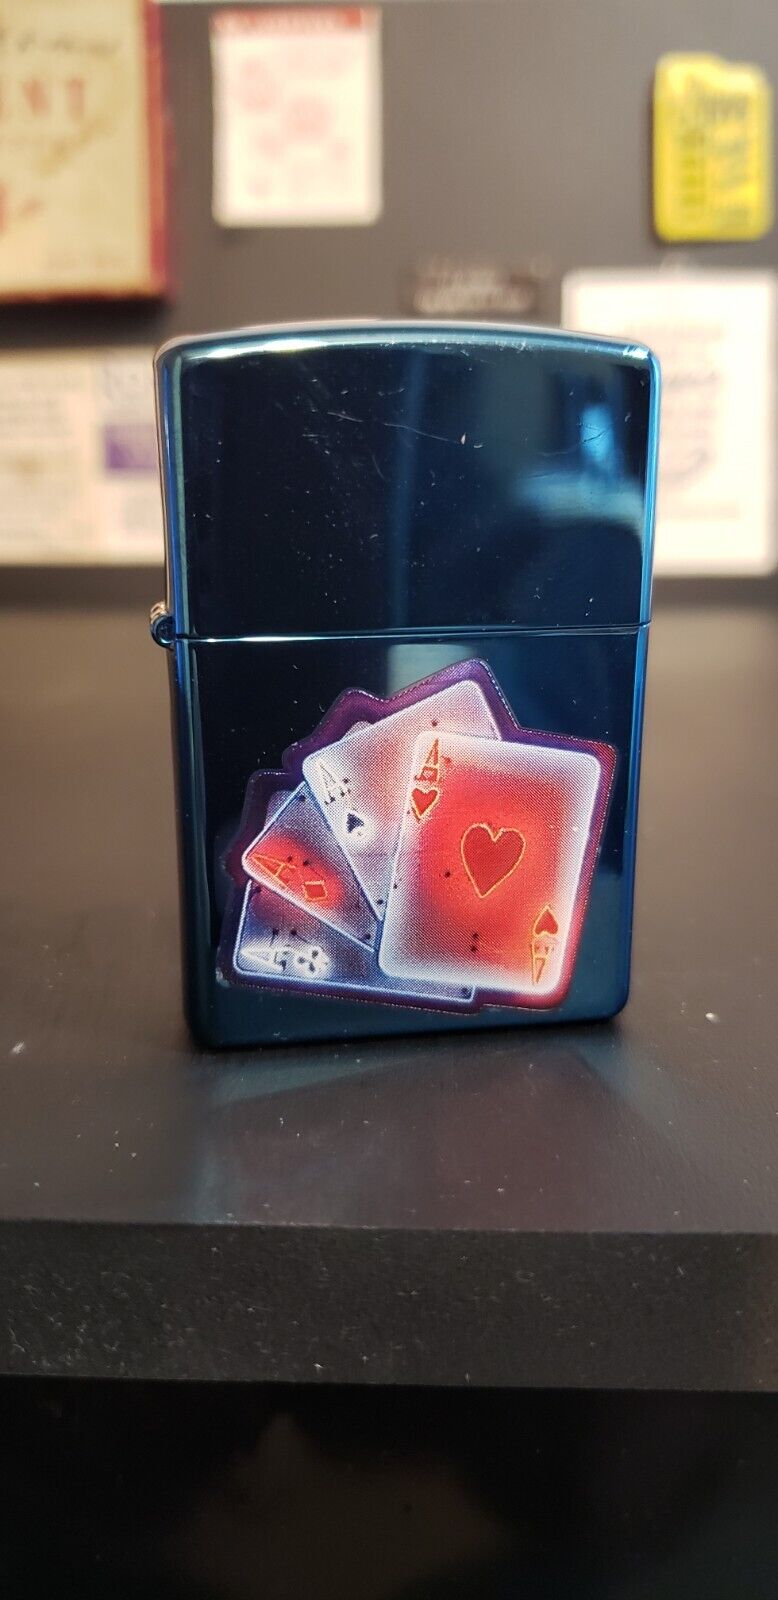 2005 Zippo Lighter - 4 Aces Street Chrome - unstruck and sealed